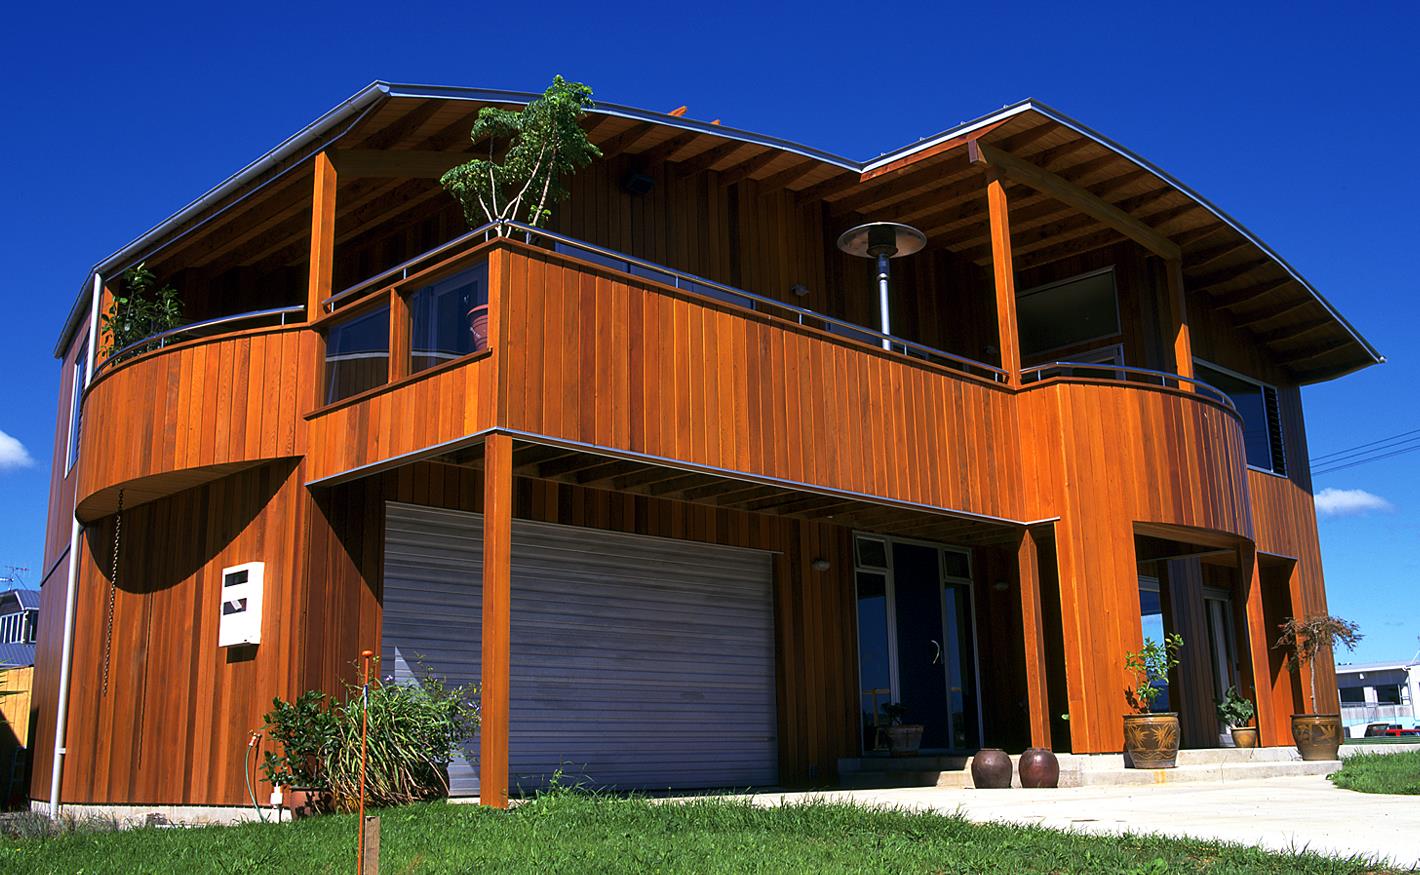 Protect exterior timber cladding with Sikkens wood stain options